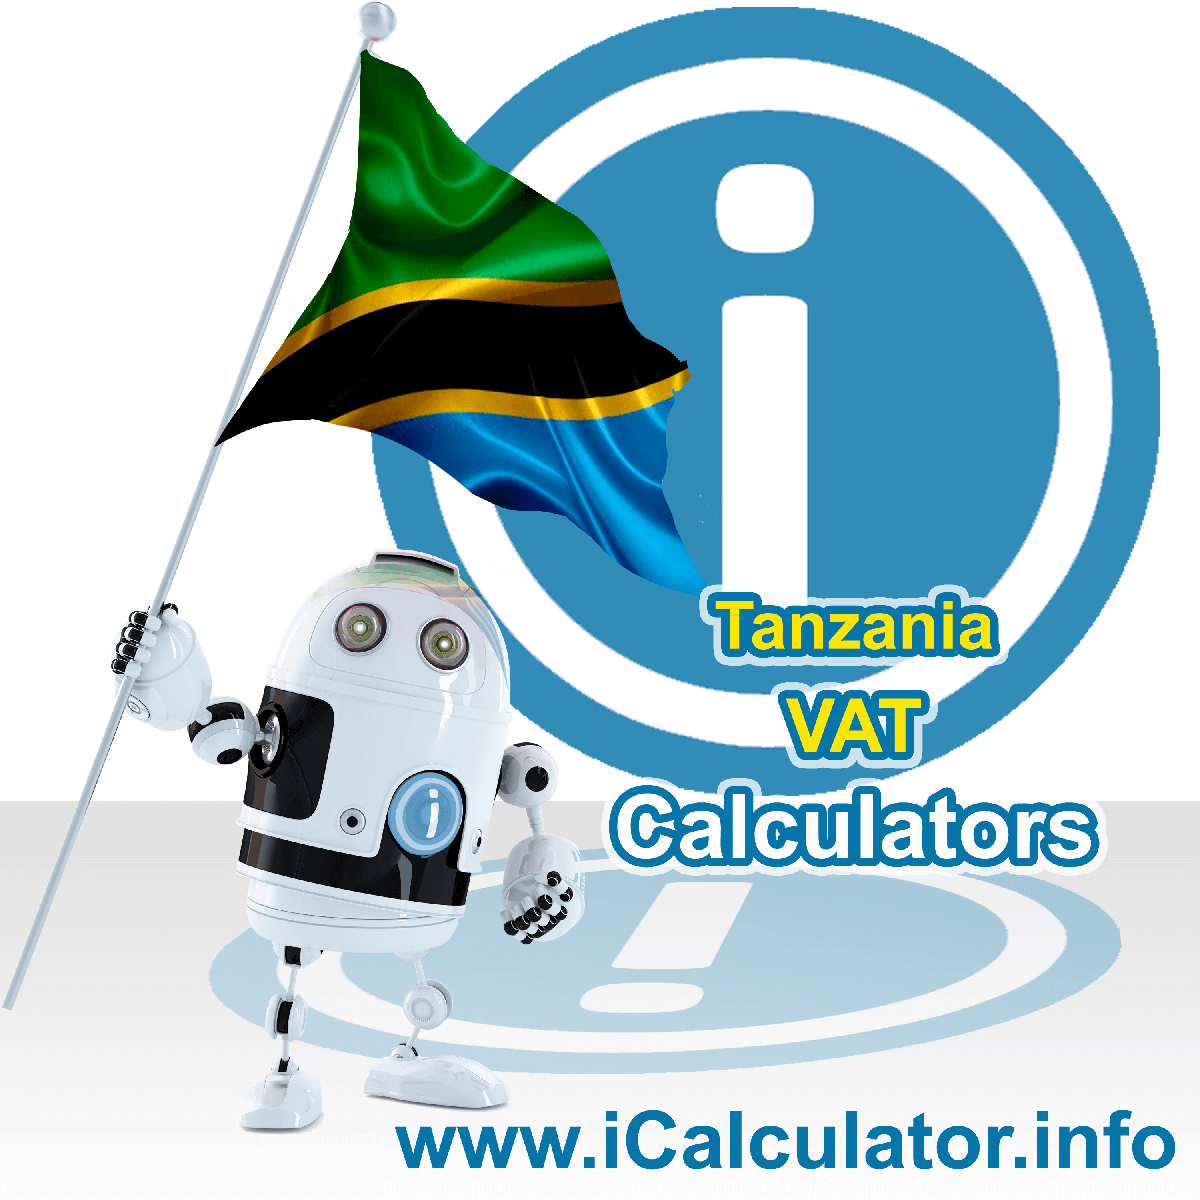 Tanzania VAT Calculator. This image shows the Tanzania flag and information relating to the VAT formula used for calculating Value Added Tax in Tanzania using the Tanzania VAT Calculator in 2023